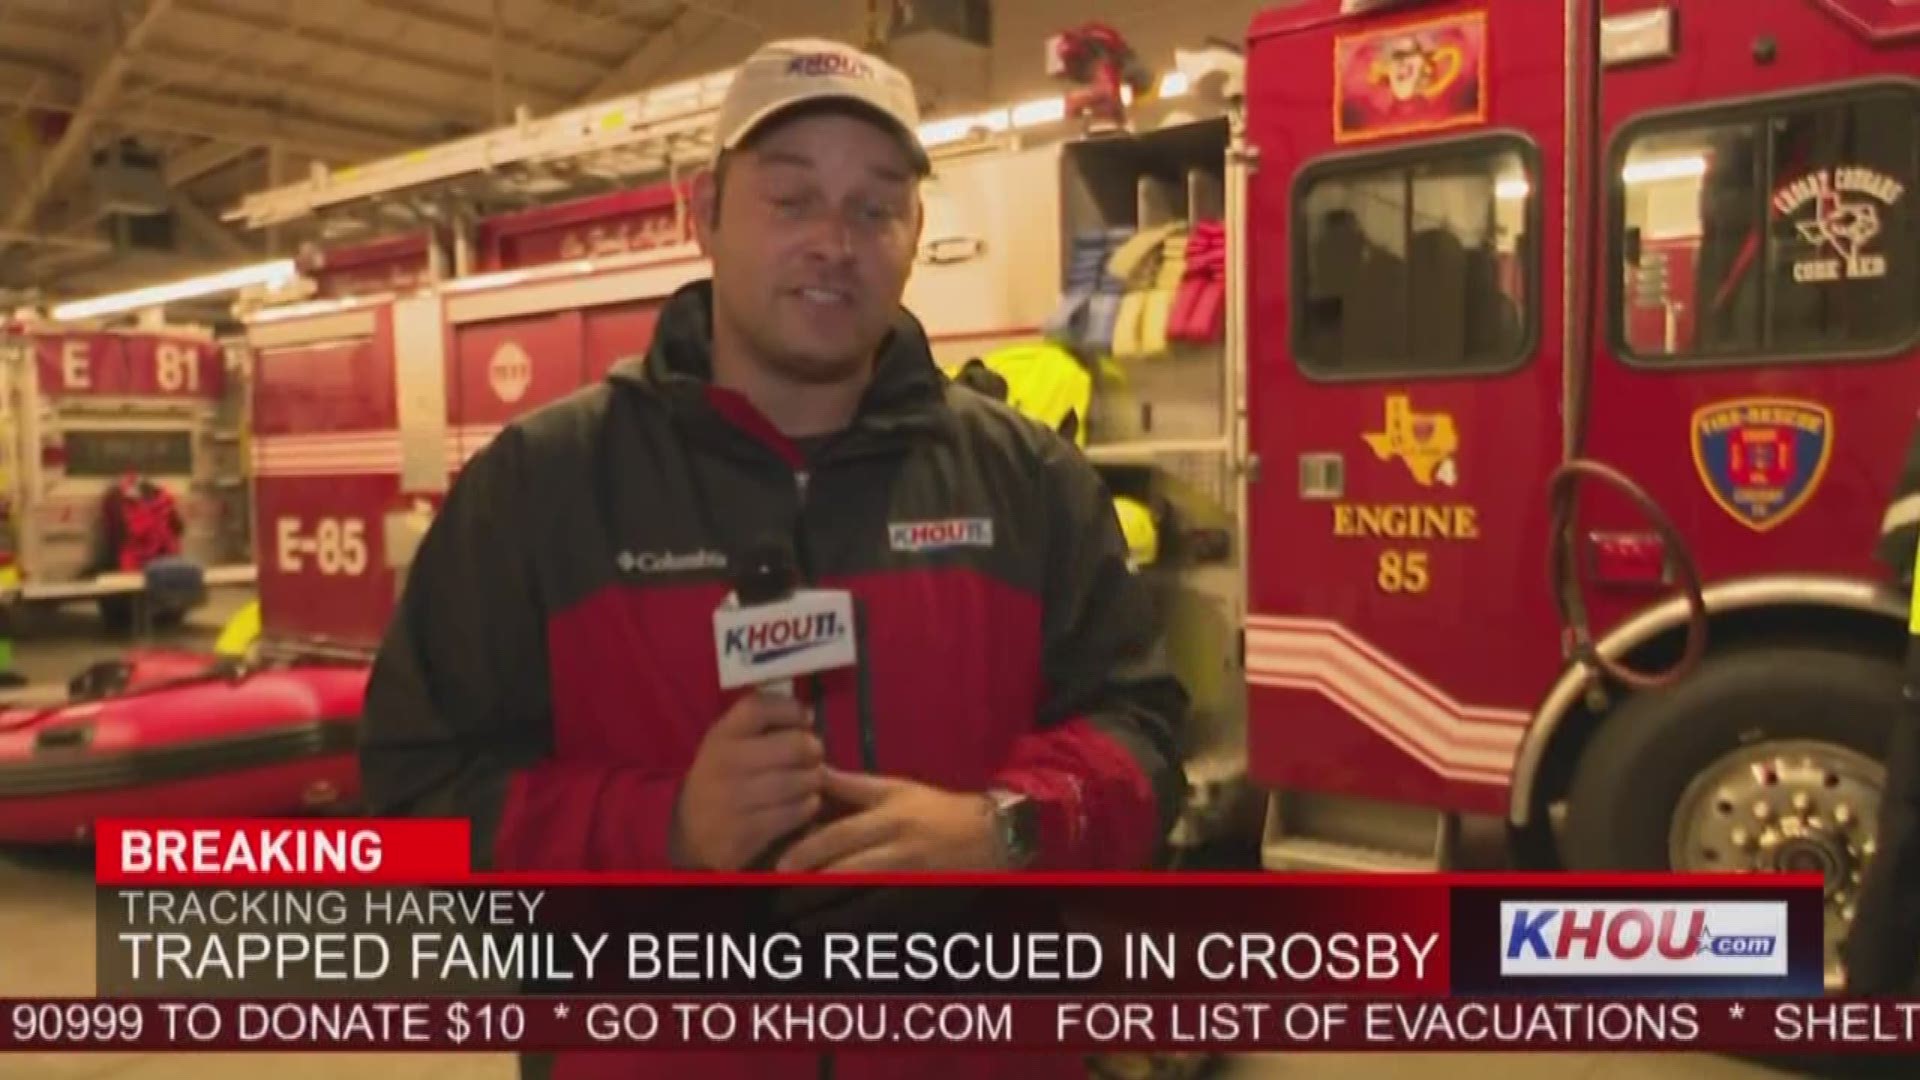 A family of five is being rescued in Crosby. 